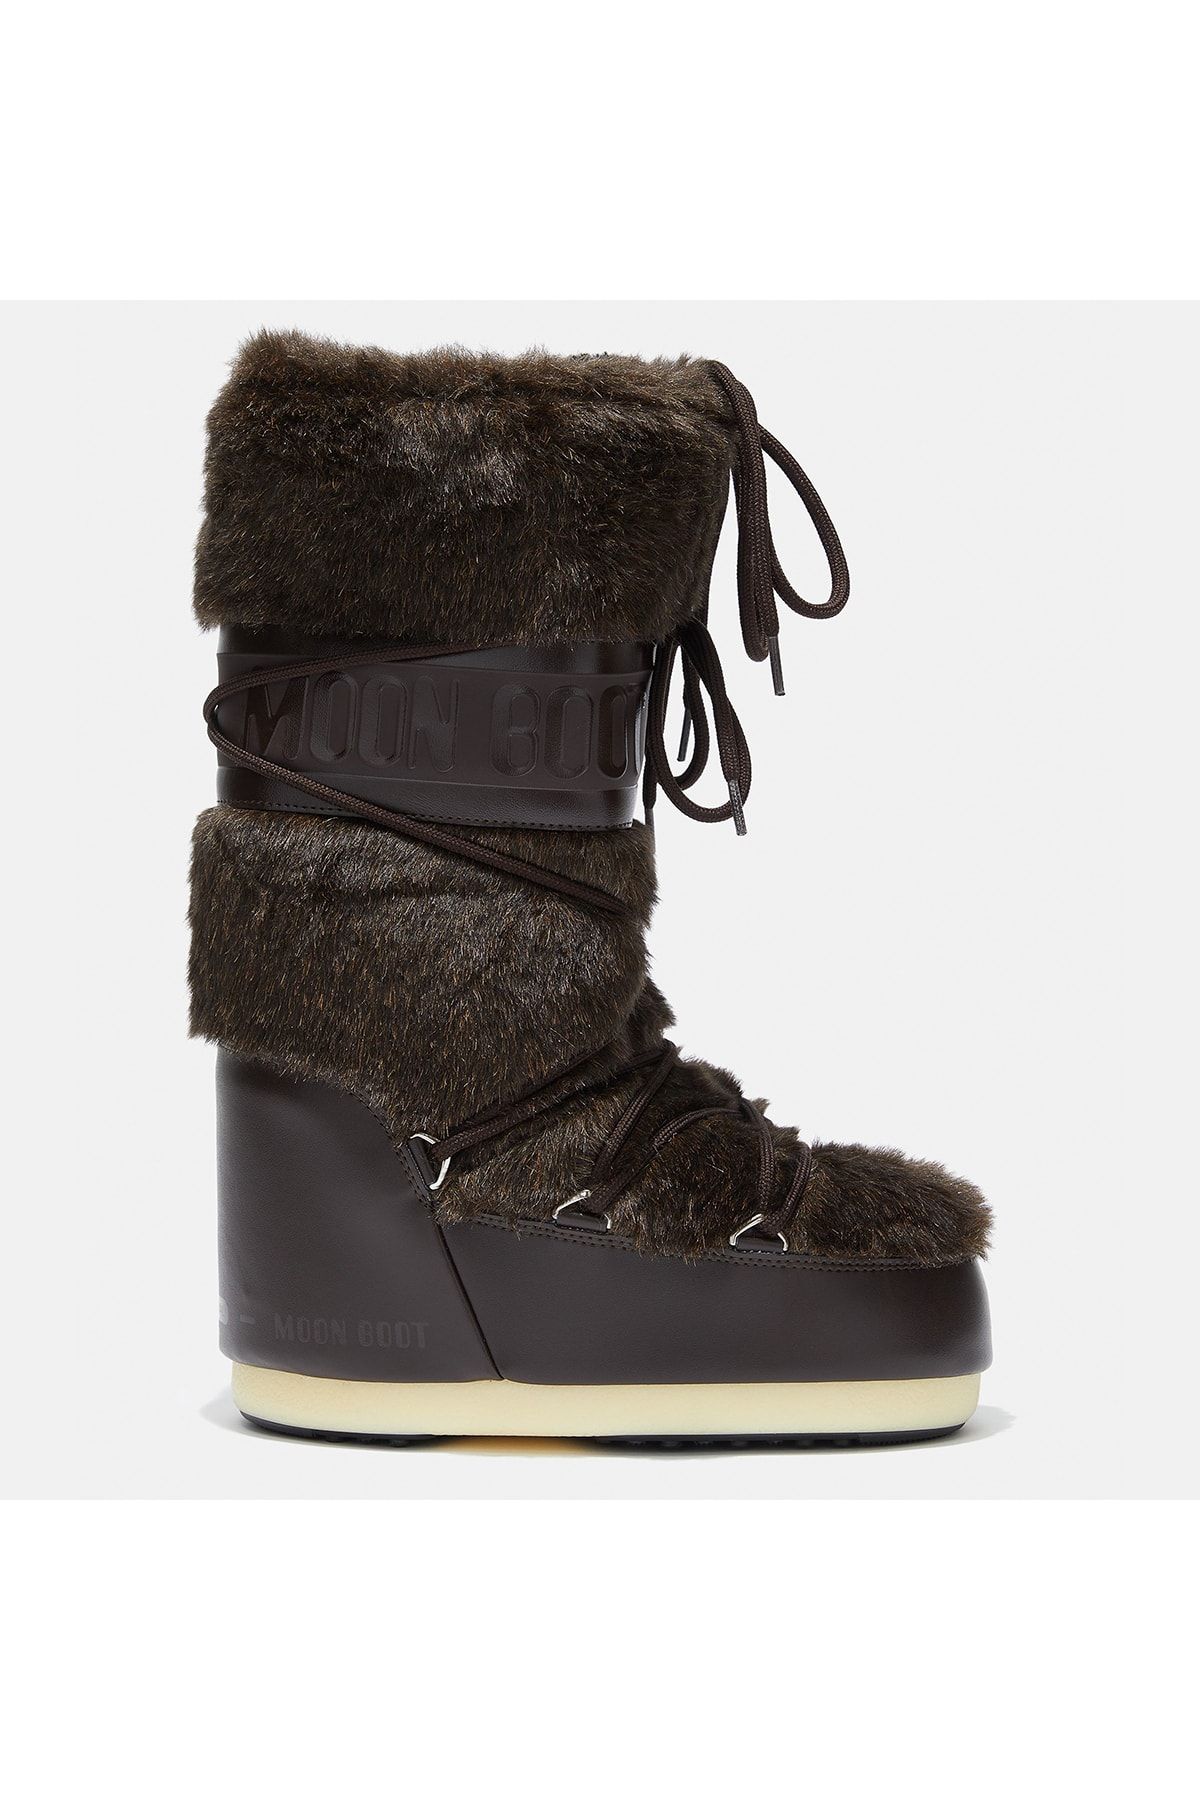 Moon Boot 14089000-004 Icon Faux Fur Brown 35-38